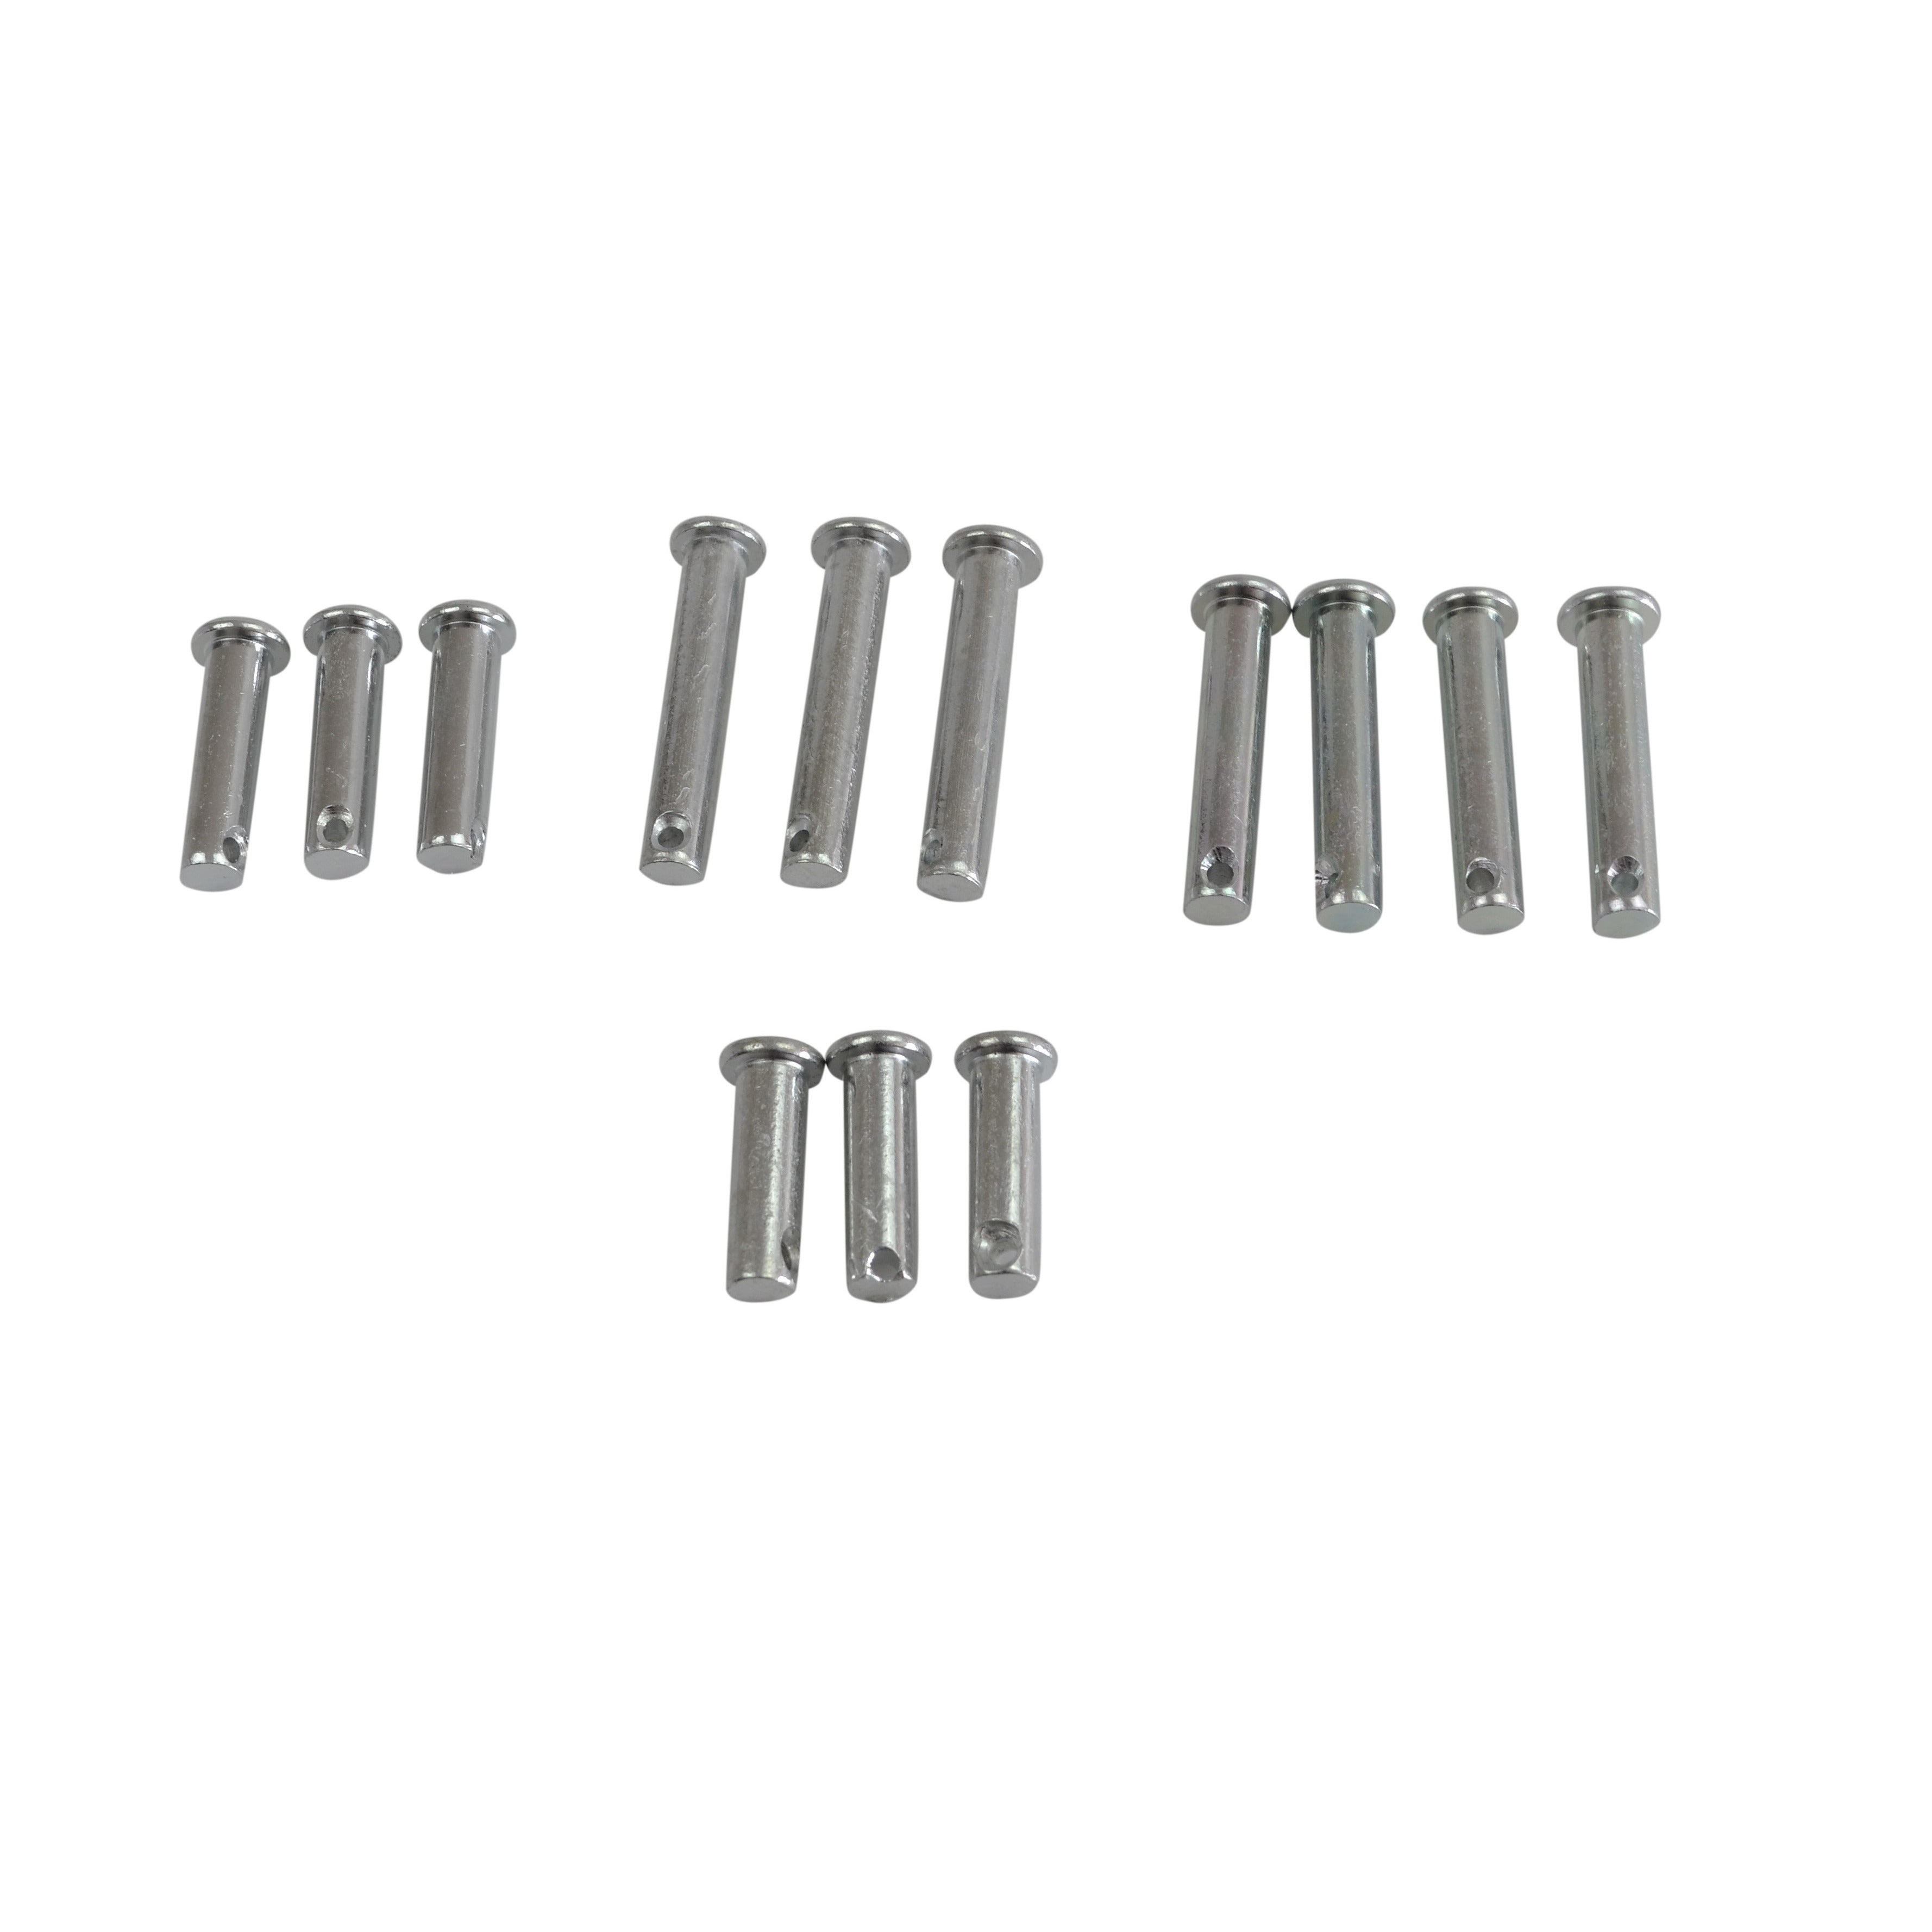 Clevis Pin 60 Piece Metric Grab Kit Assortment Twin Eagle Imports 